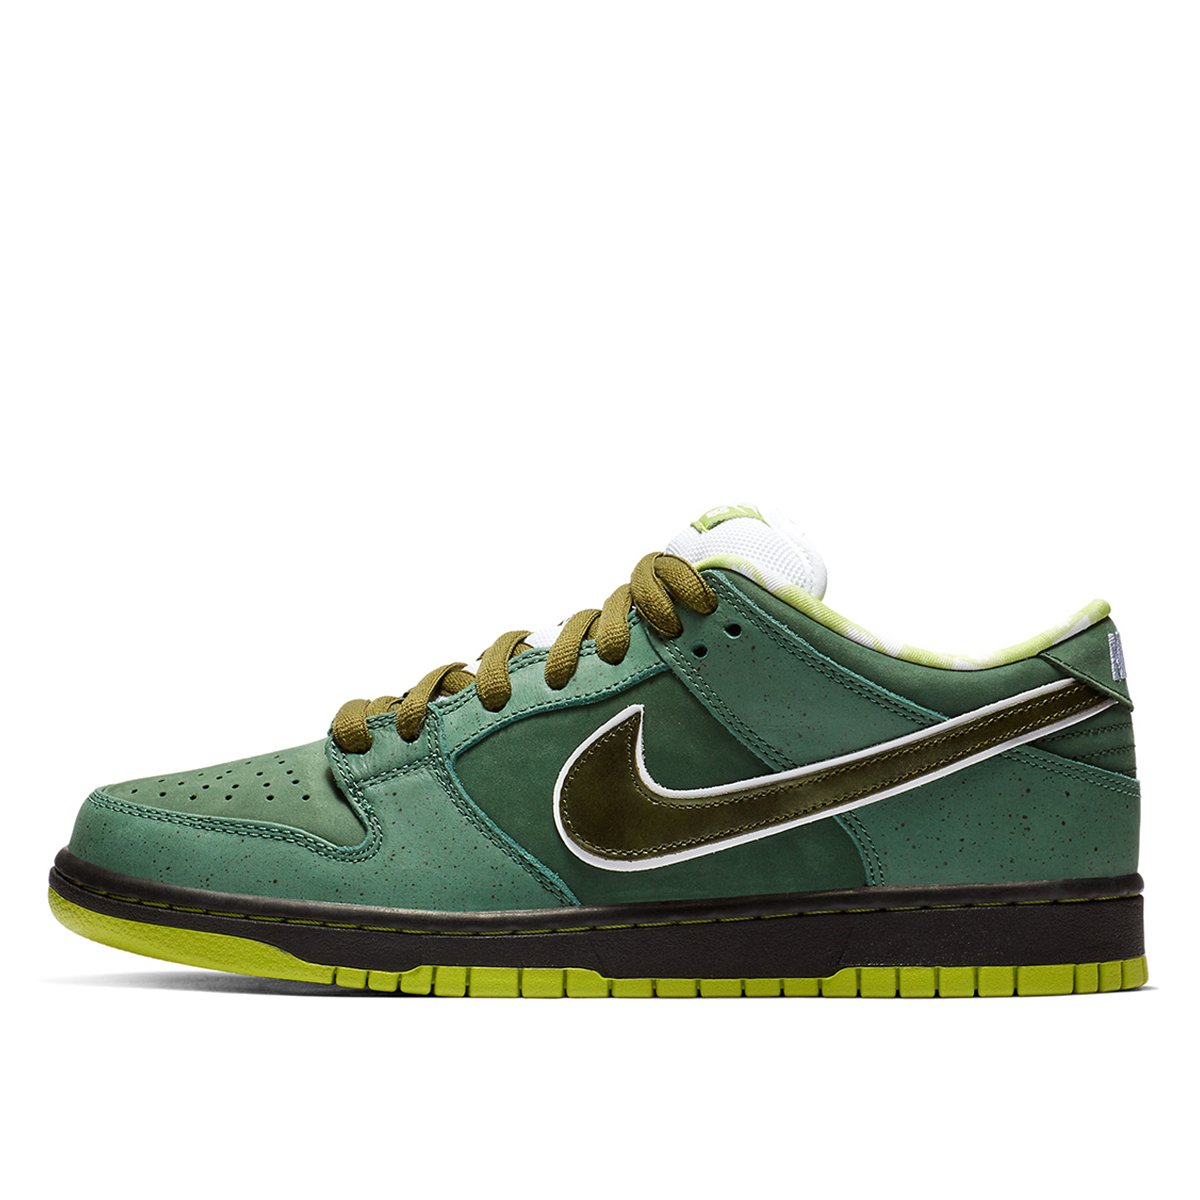 Nike SB Concepts x Dunk Low Green Lobster Special Box BV1310-337